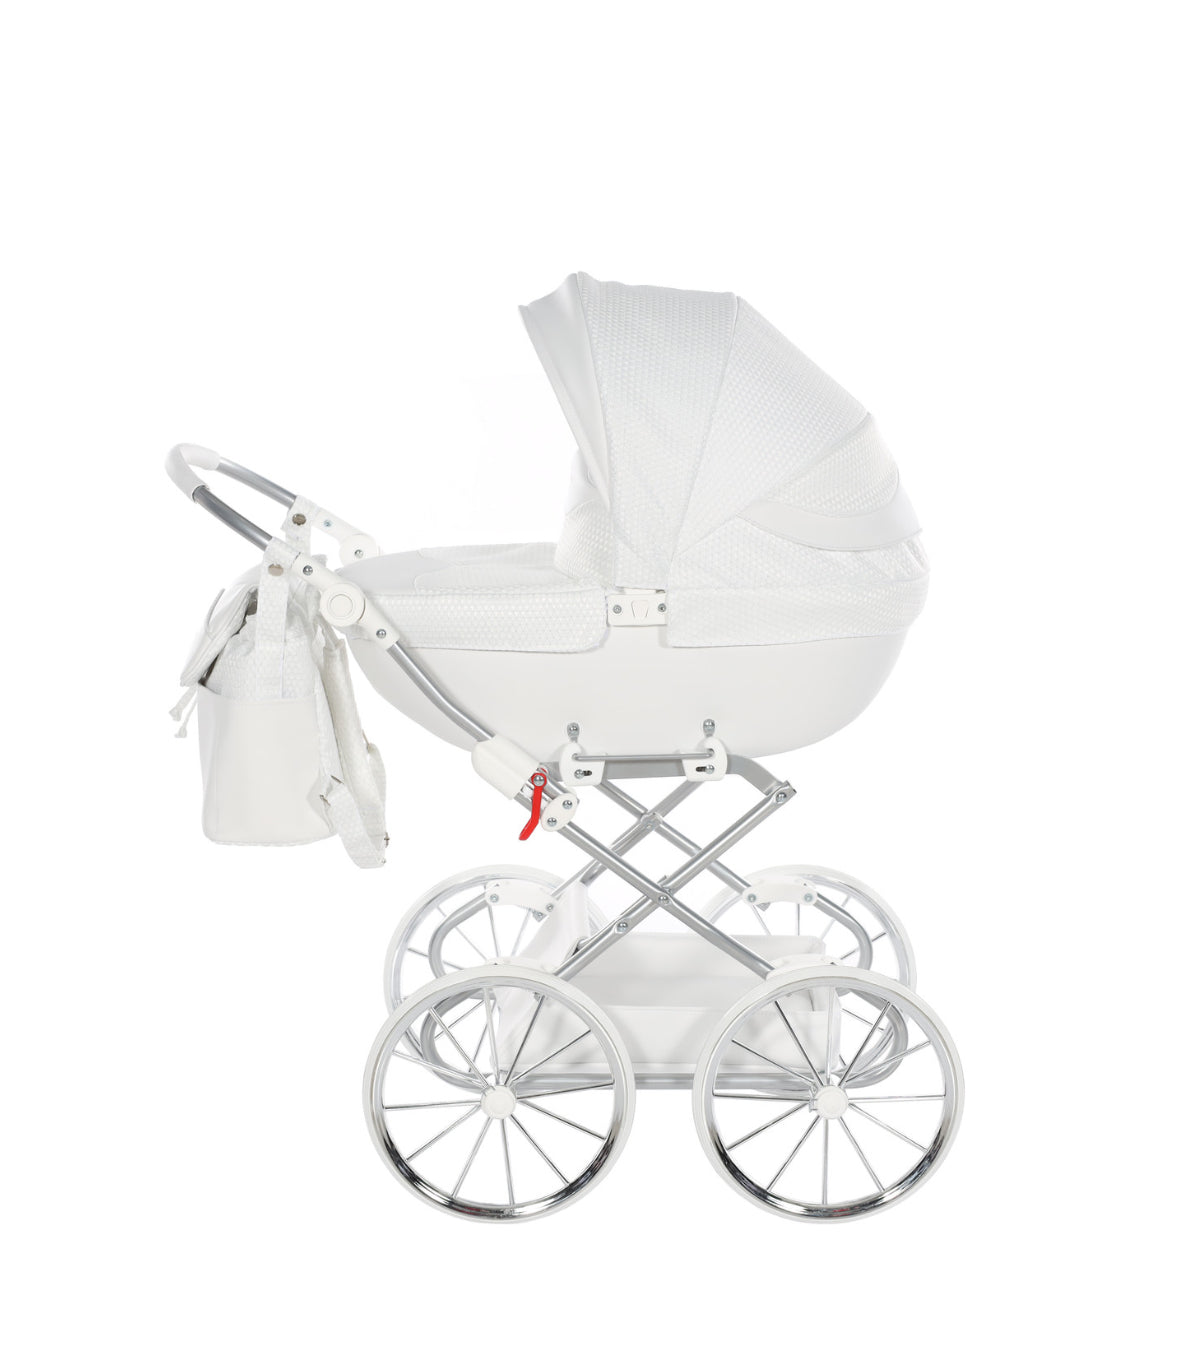 WHITE & SILVER DOLCE DOLL'S PRAM (1-2 days delivery)